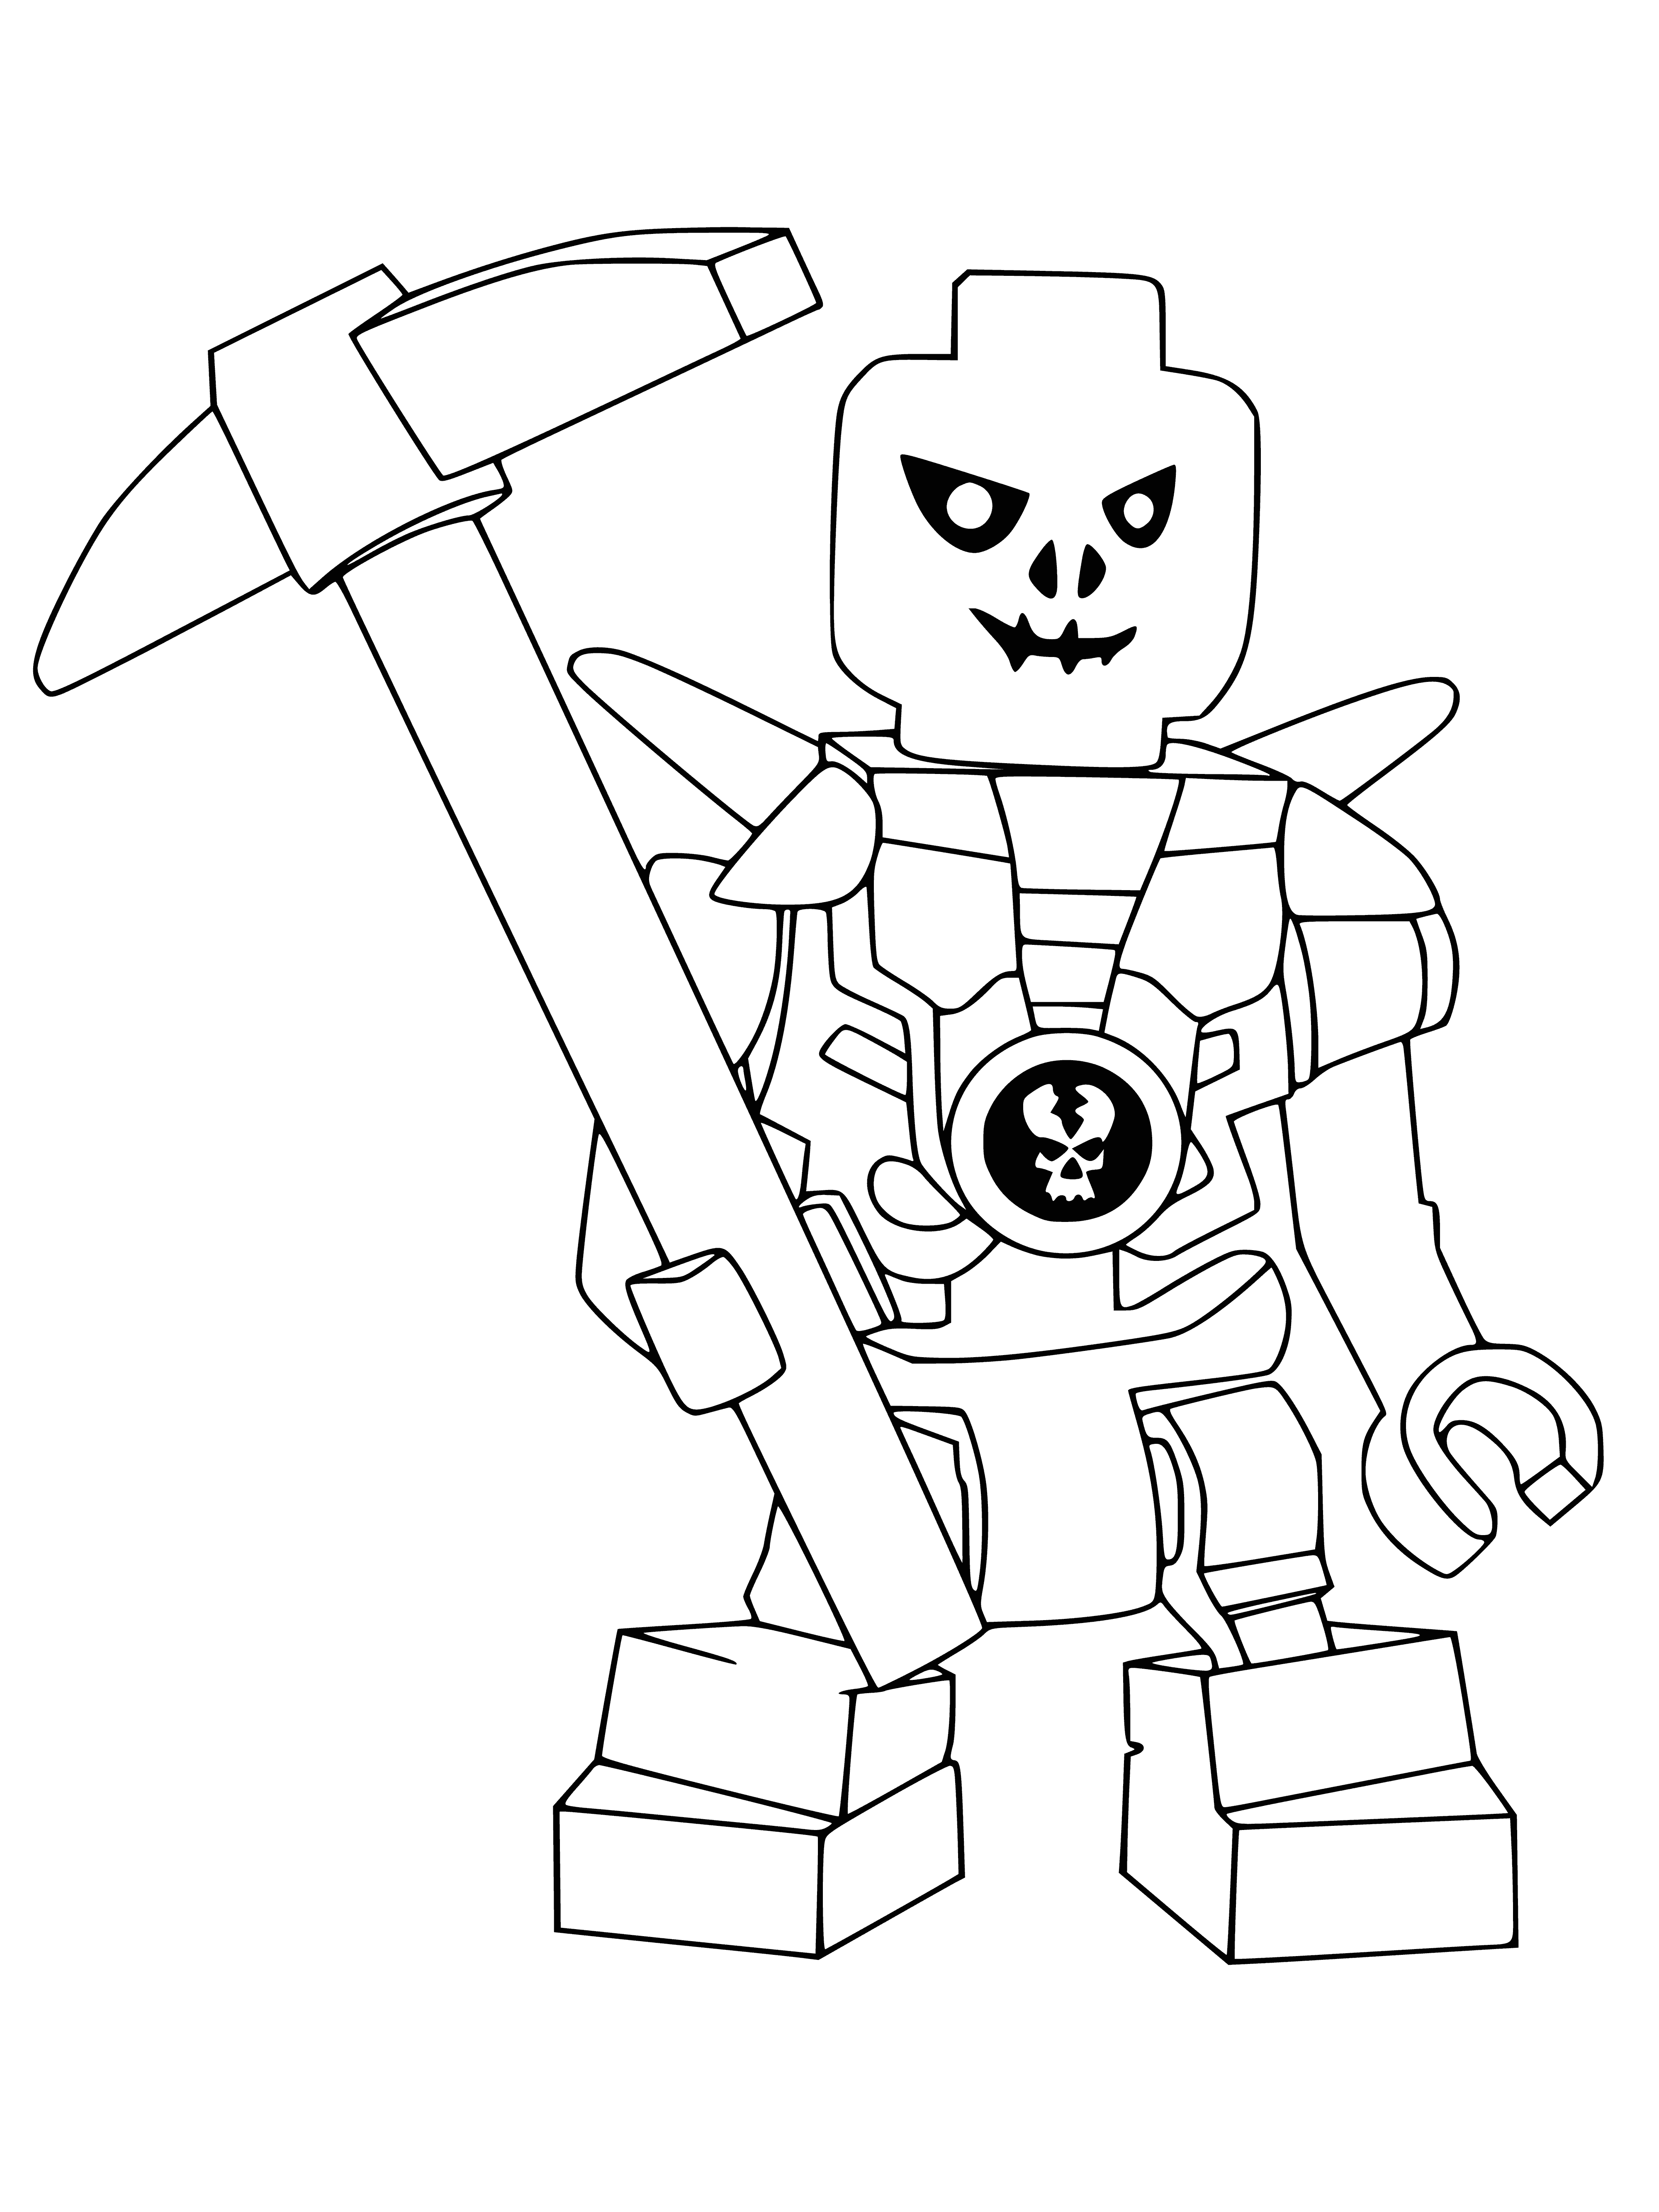 Lego skeleton coloring page